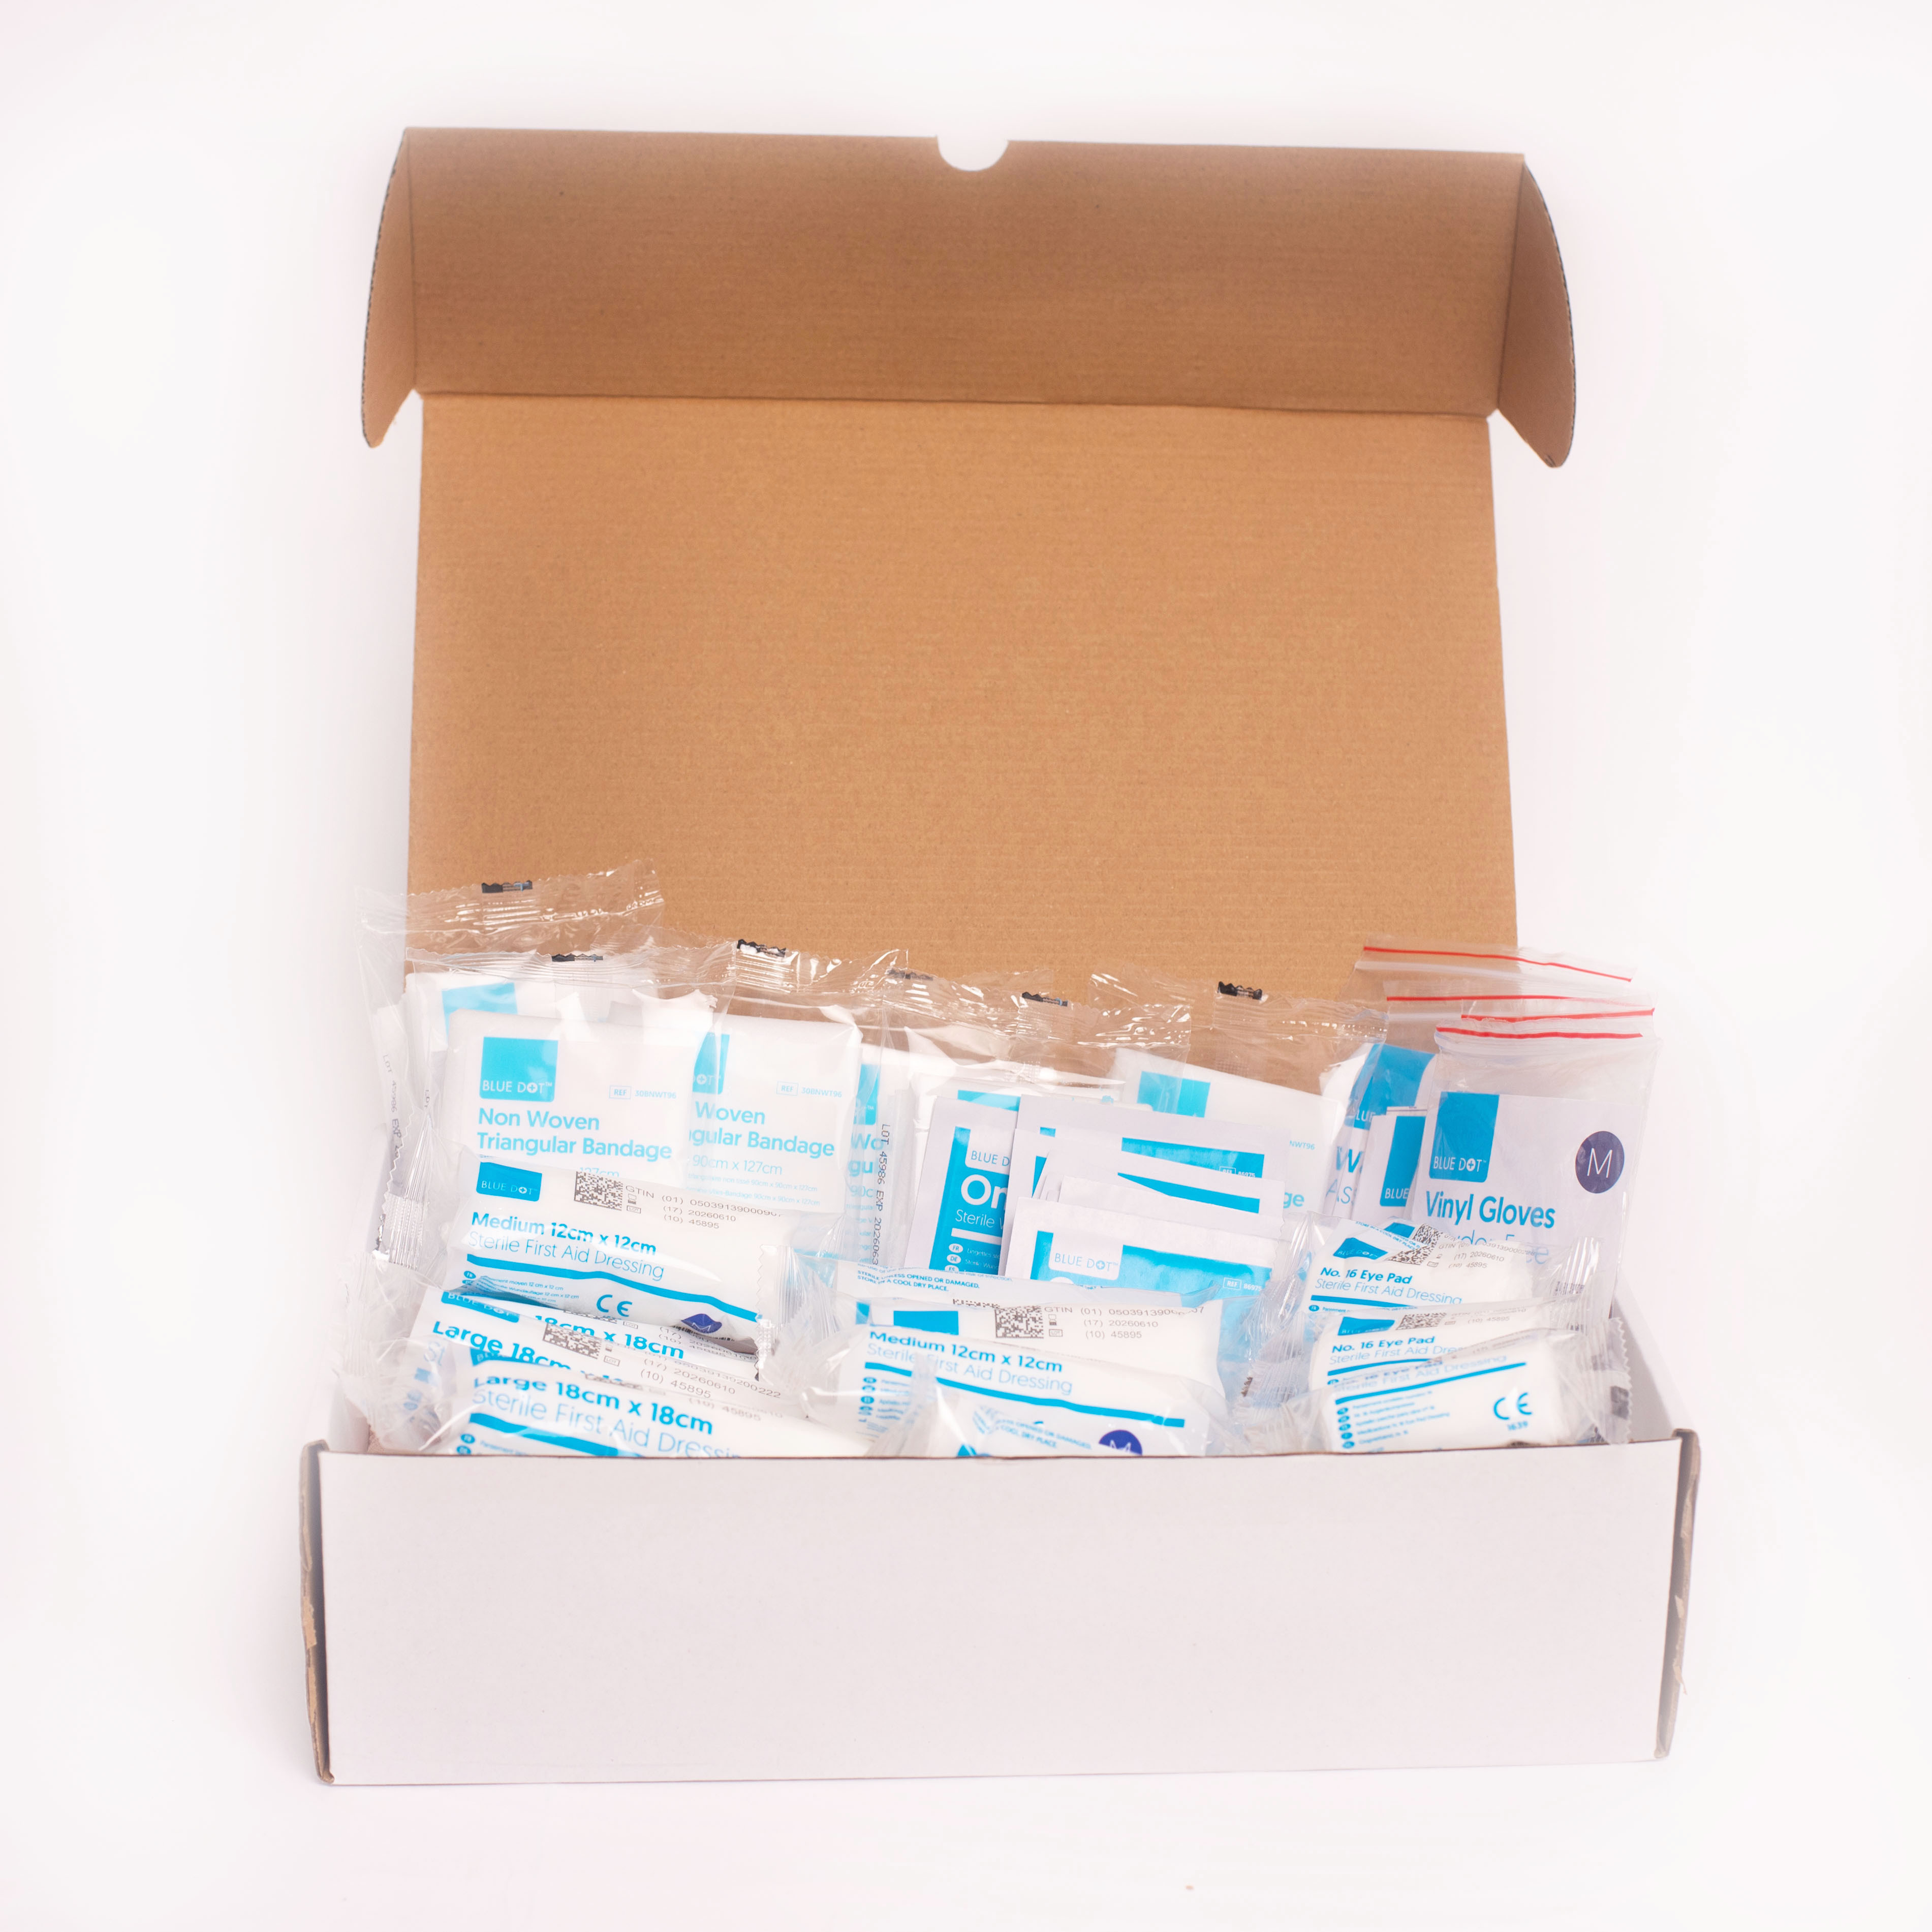 HSE Standard First Aid Kit Refill - 1-20 Person